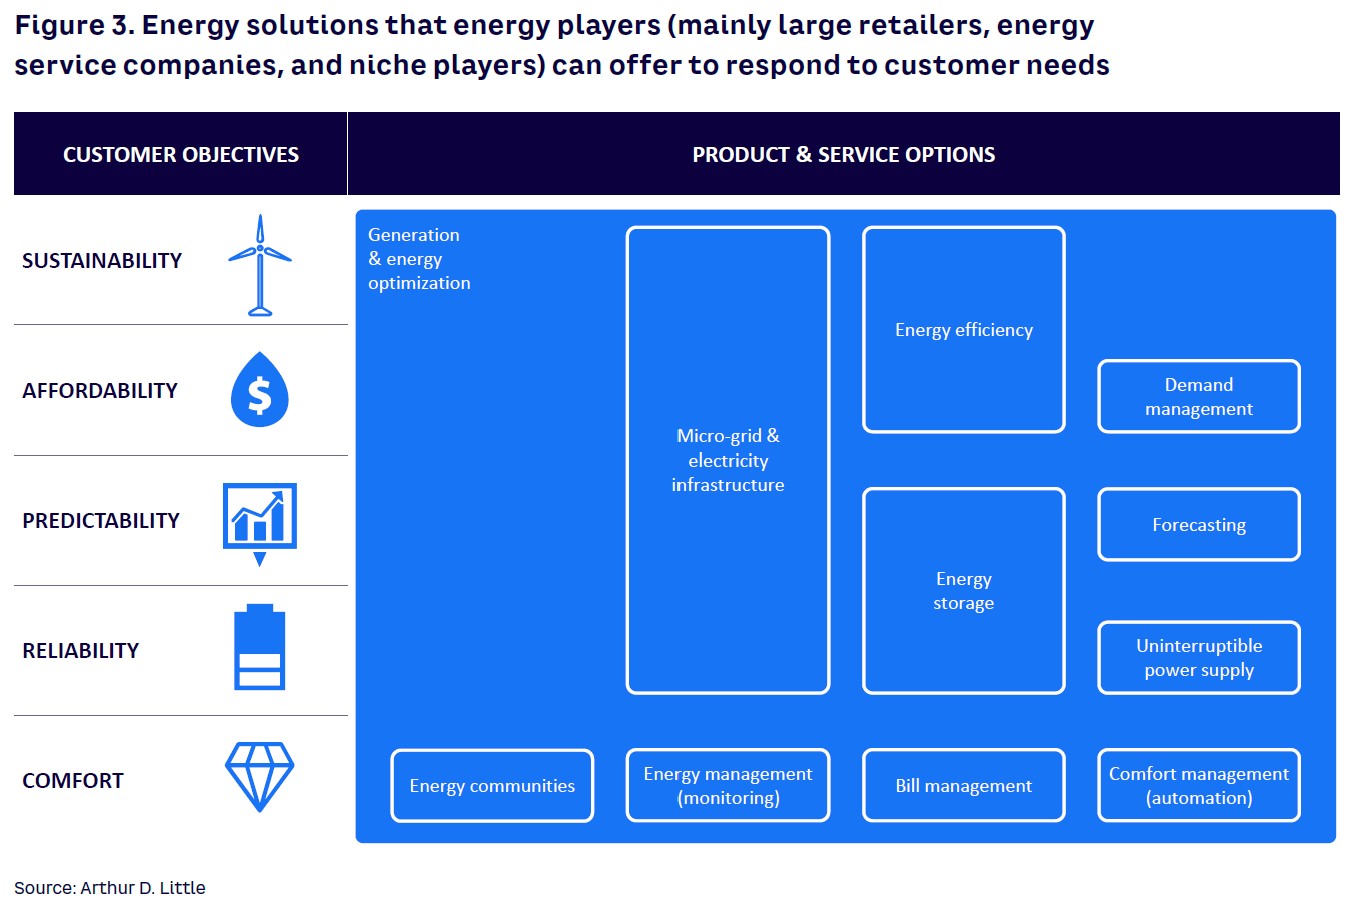 Figure 3. Energy solutions that energy players (mainly large retailers, energy service companies, and niche players) can offer to respond to customer needs